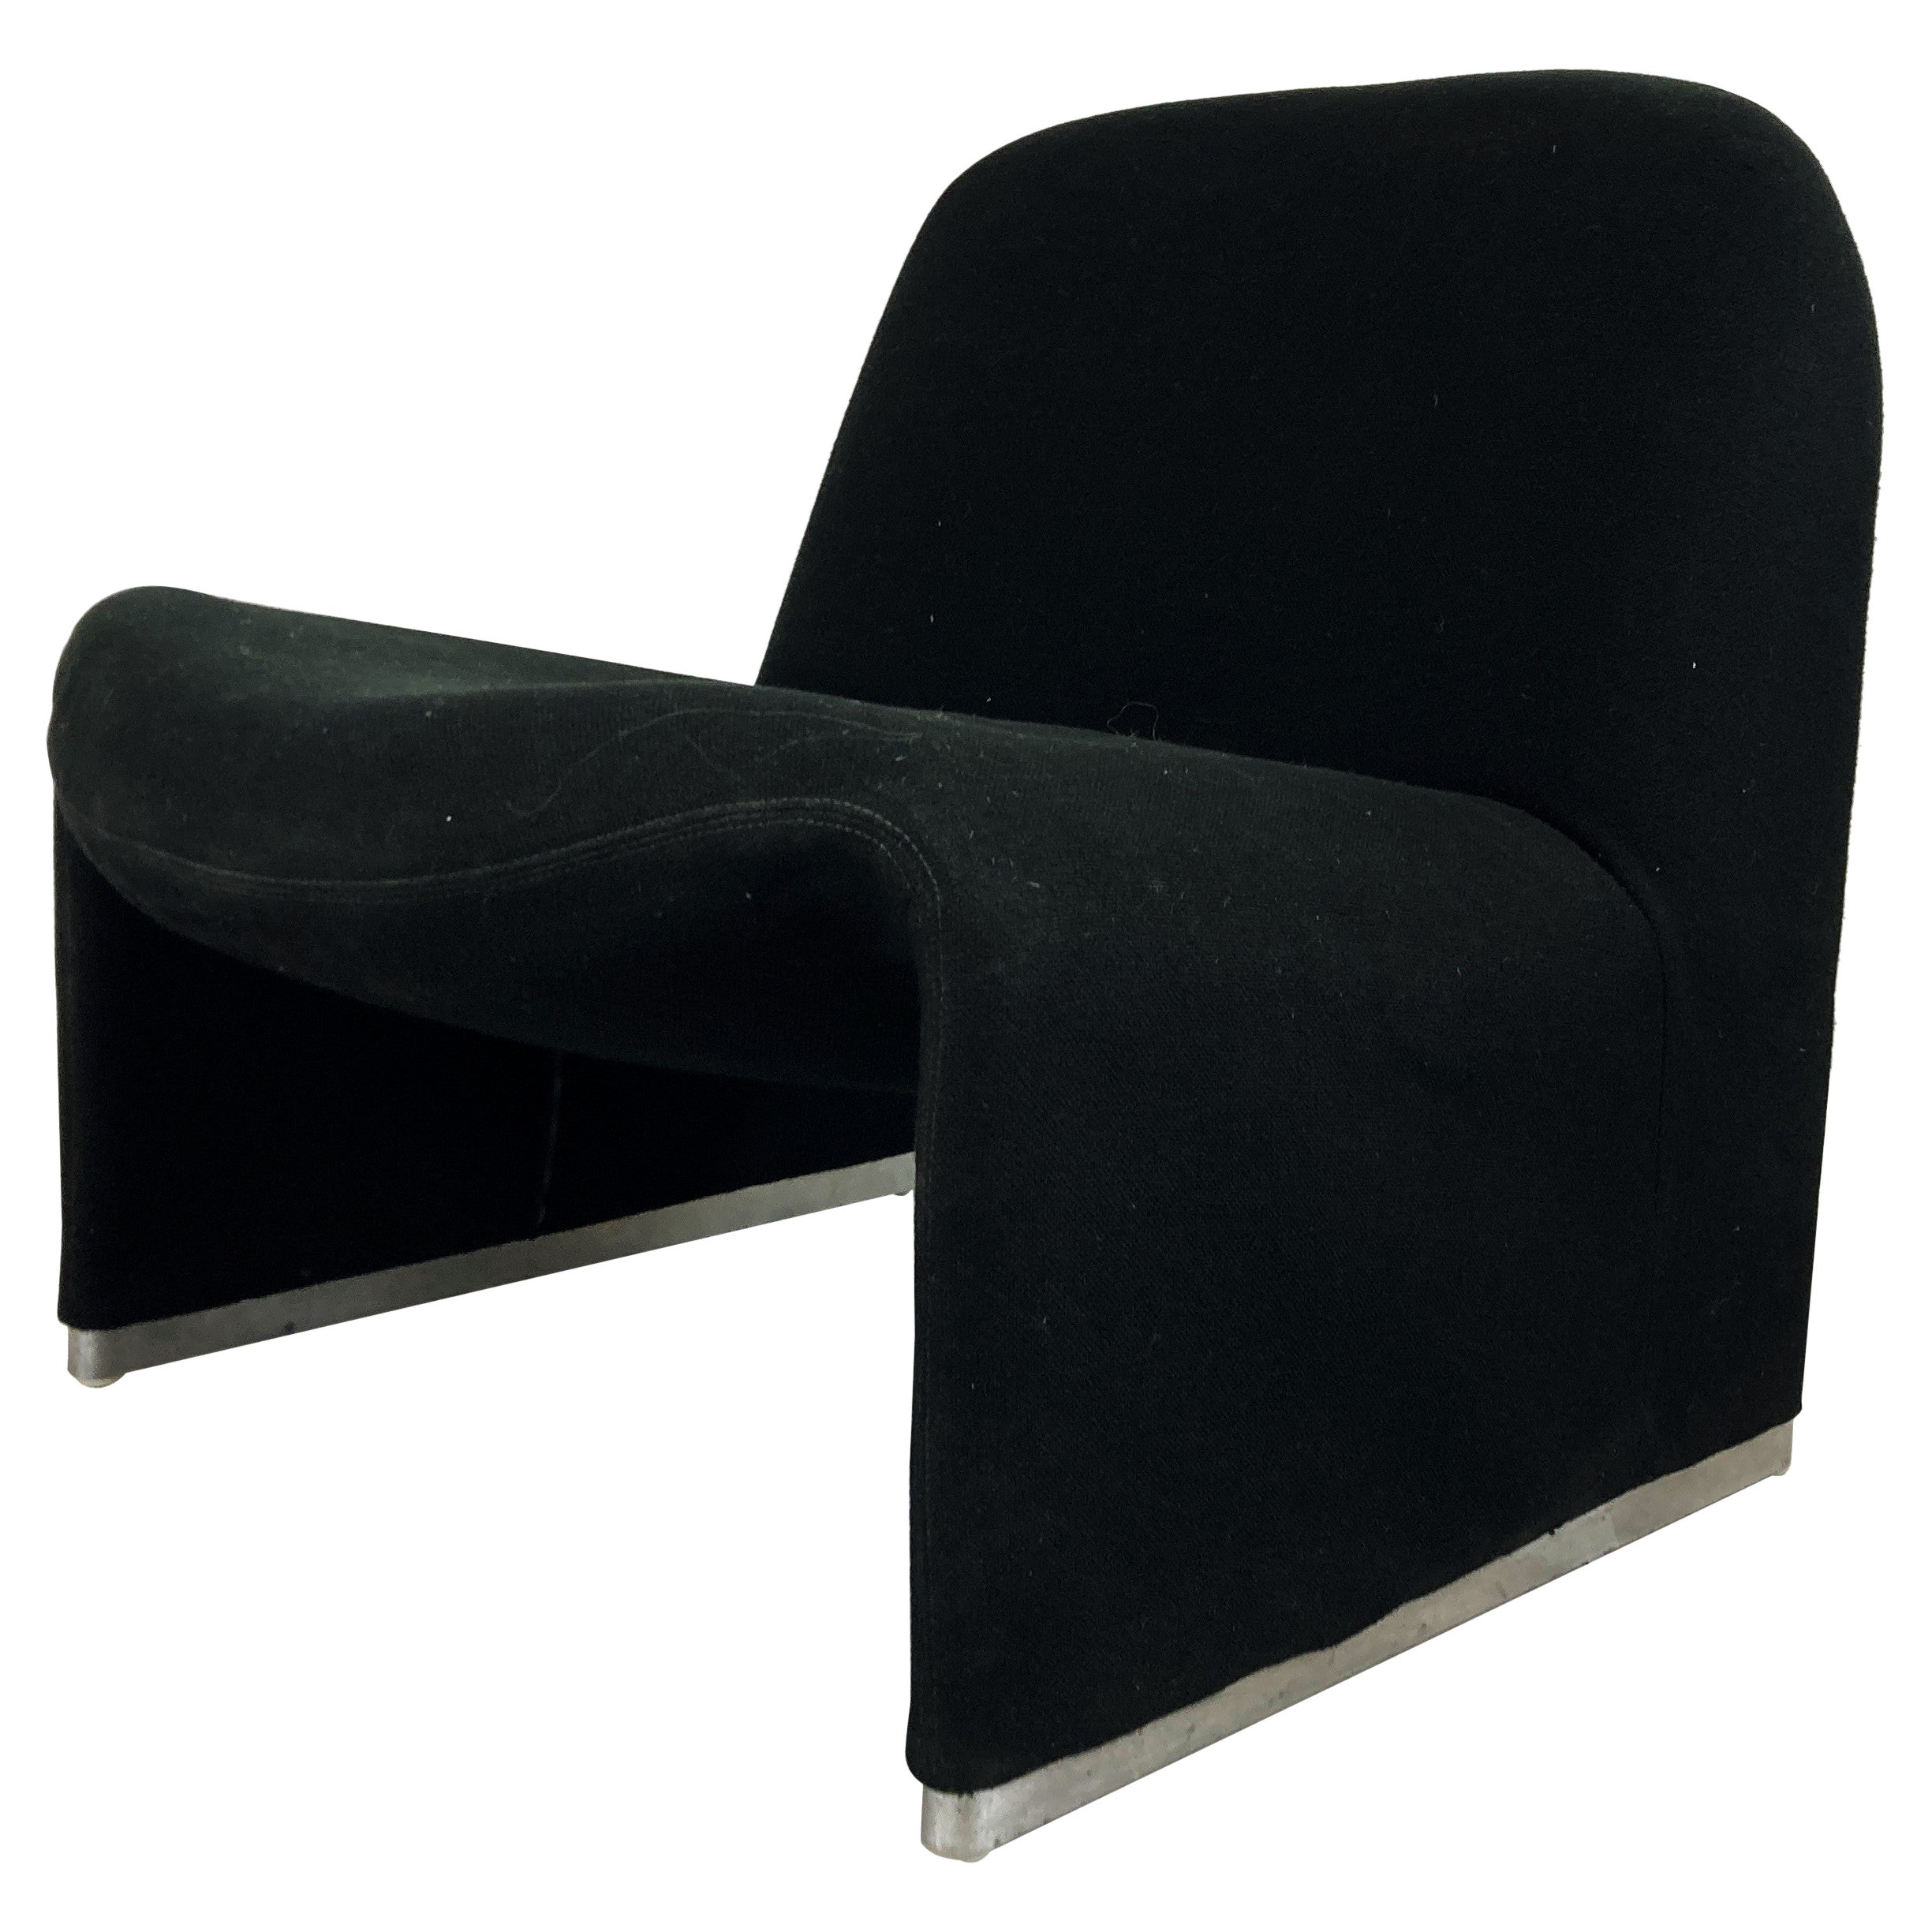 Alky Chair Designed by Giancarlo Piretti for Castelli, 1970s